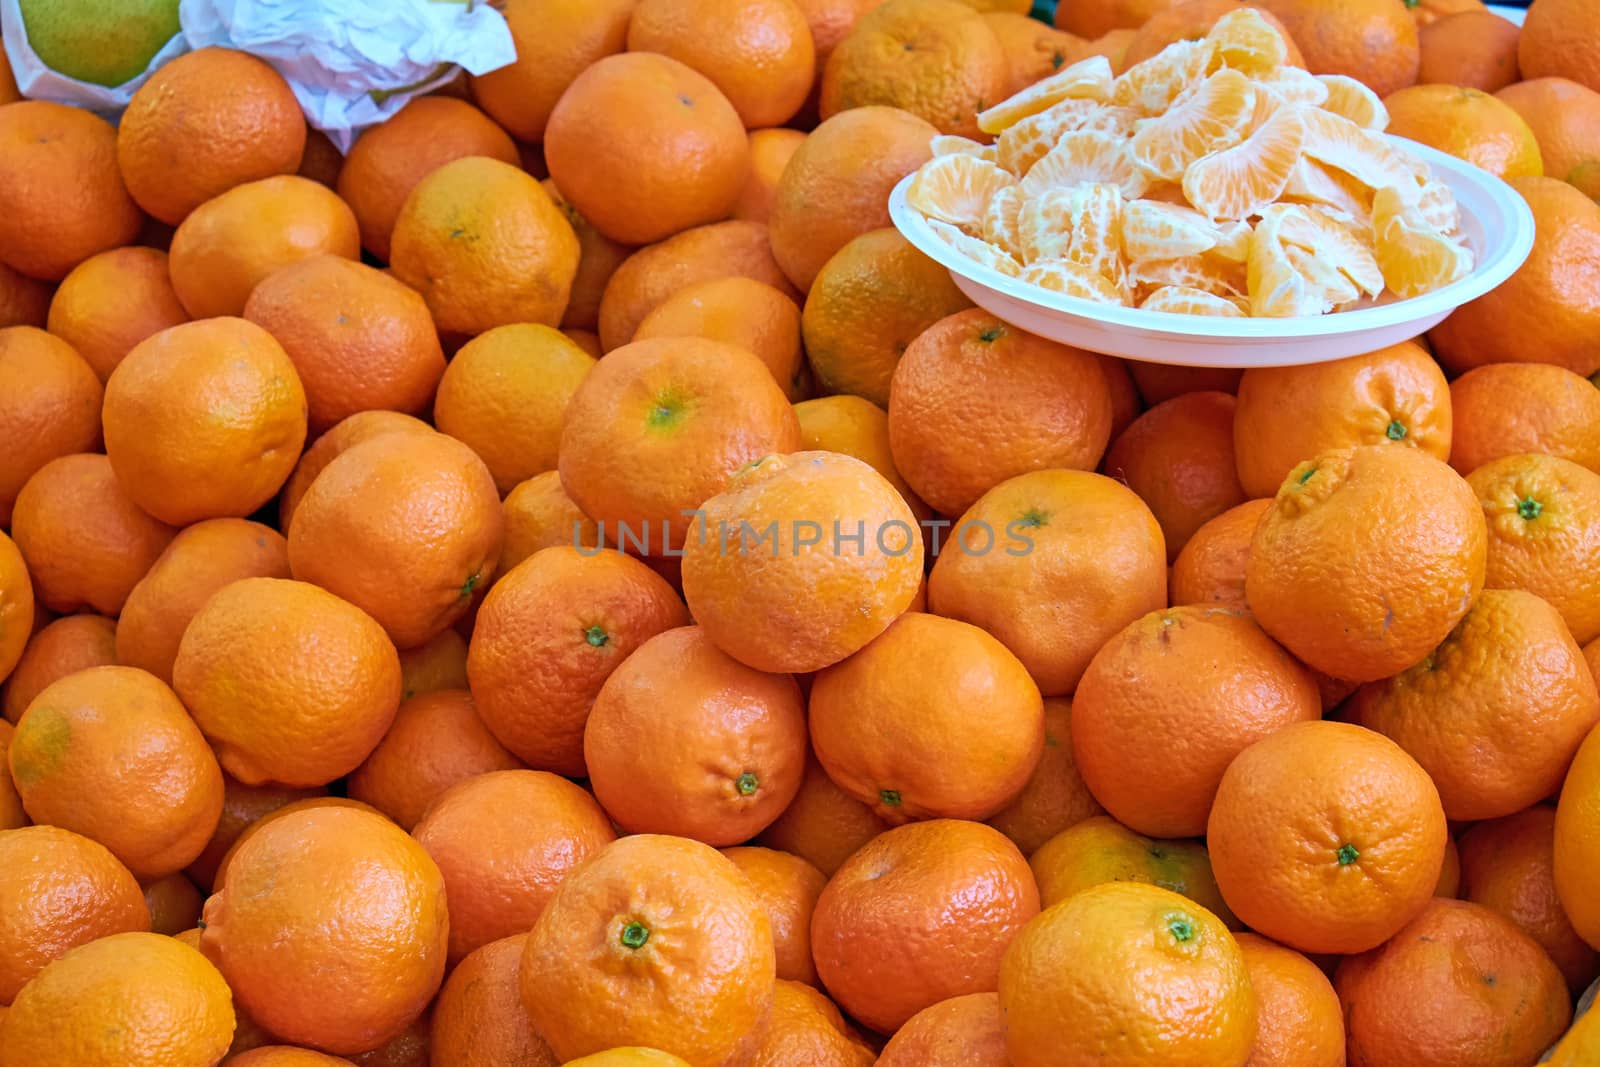 Tangerines for sale at a market with some pieces on a plate